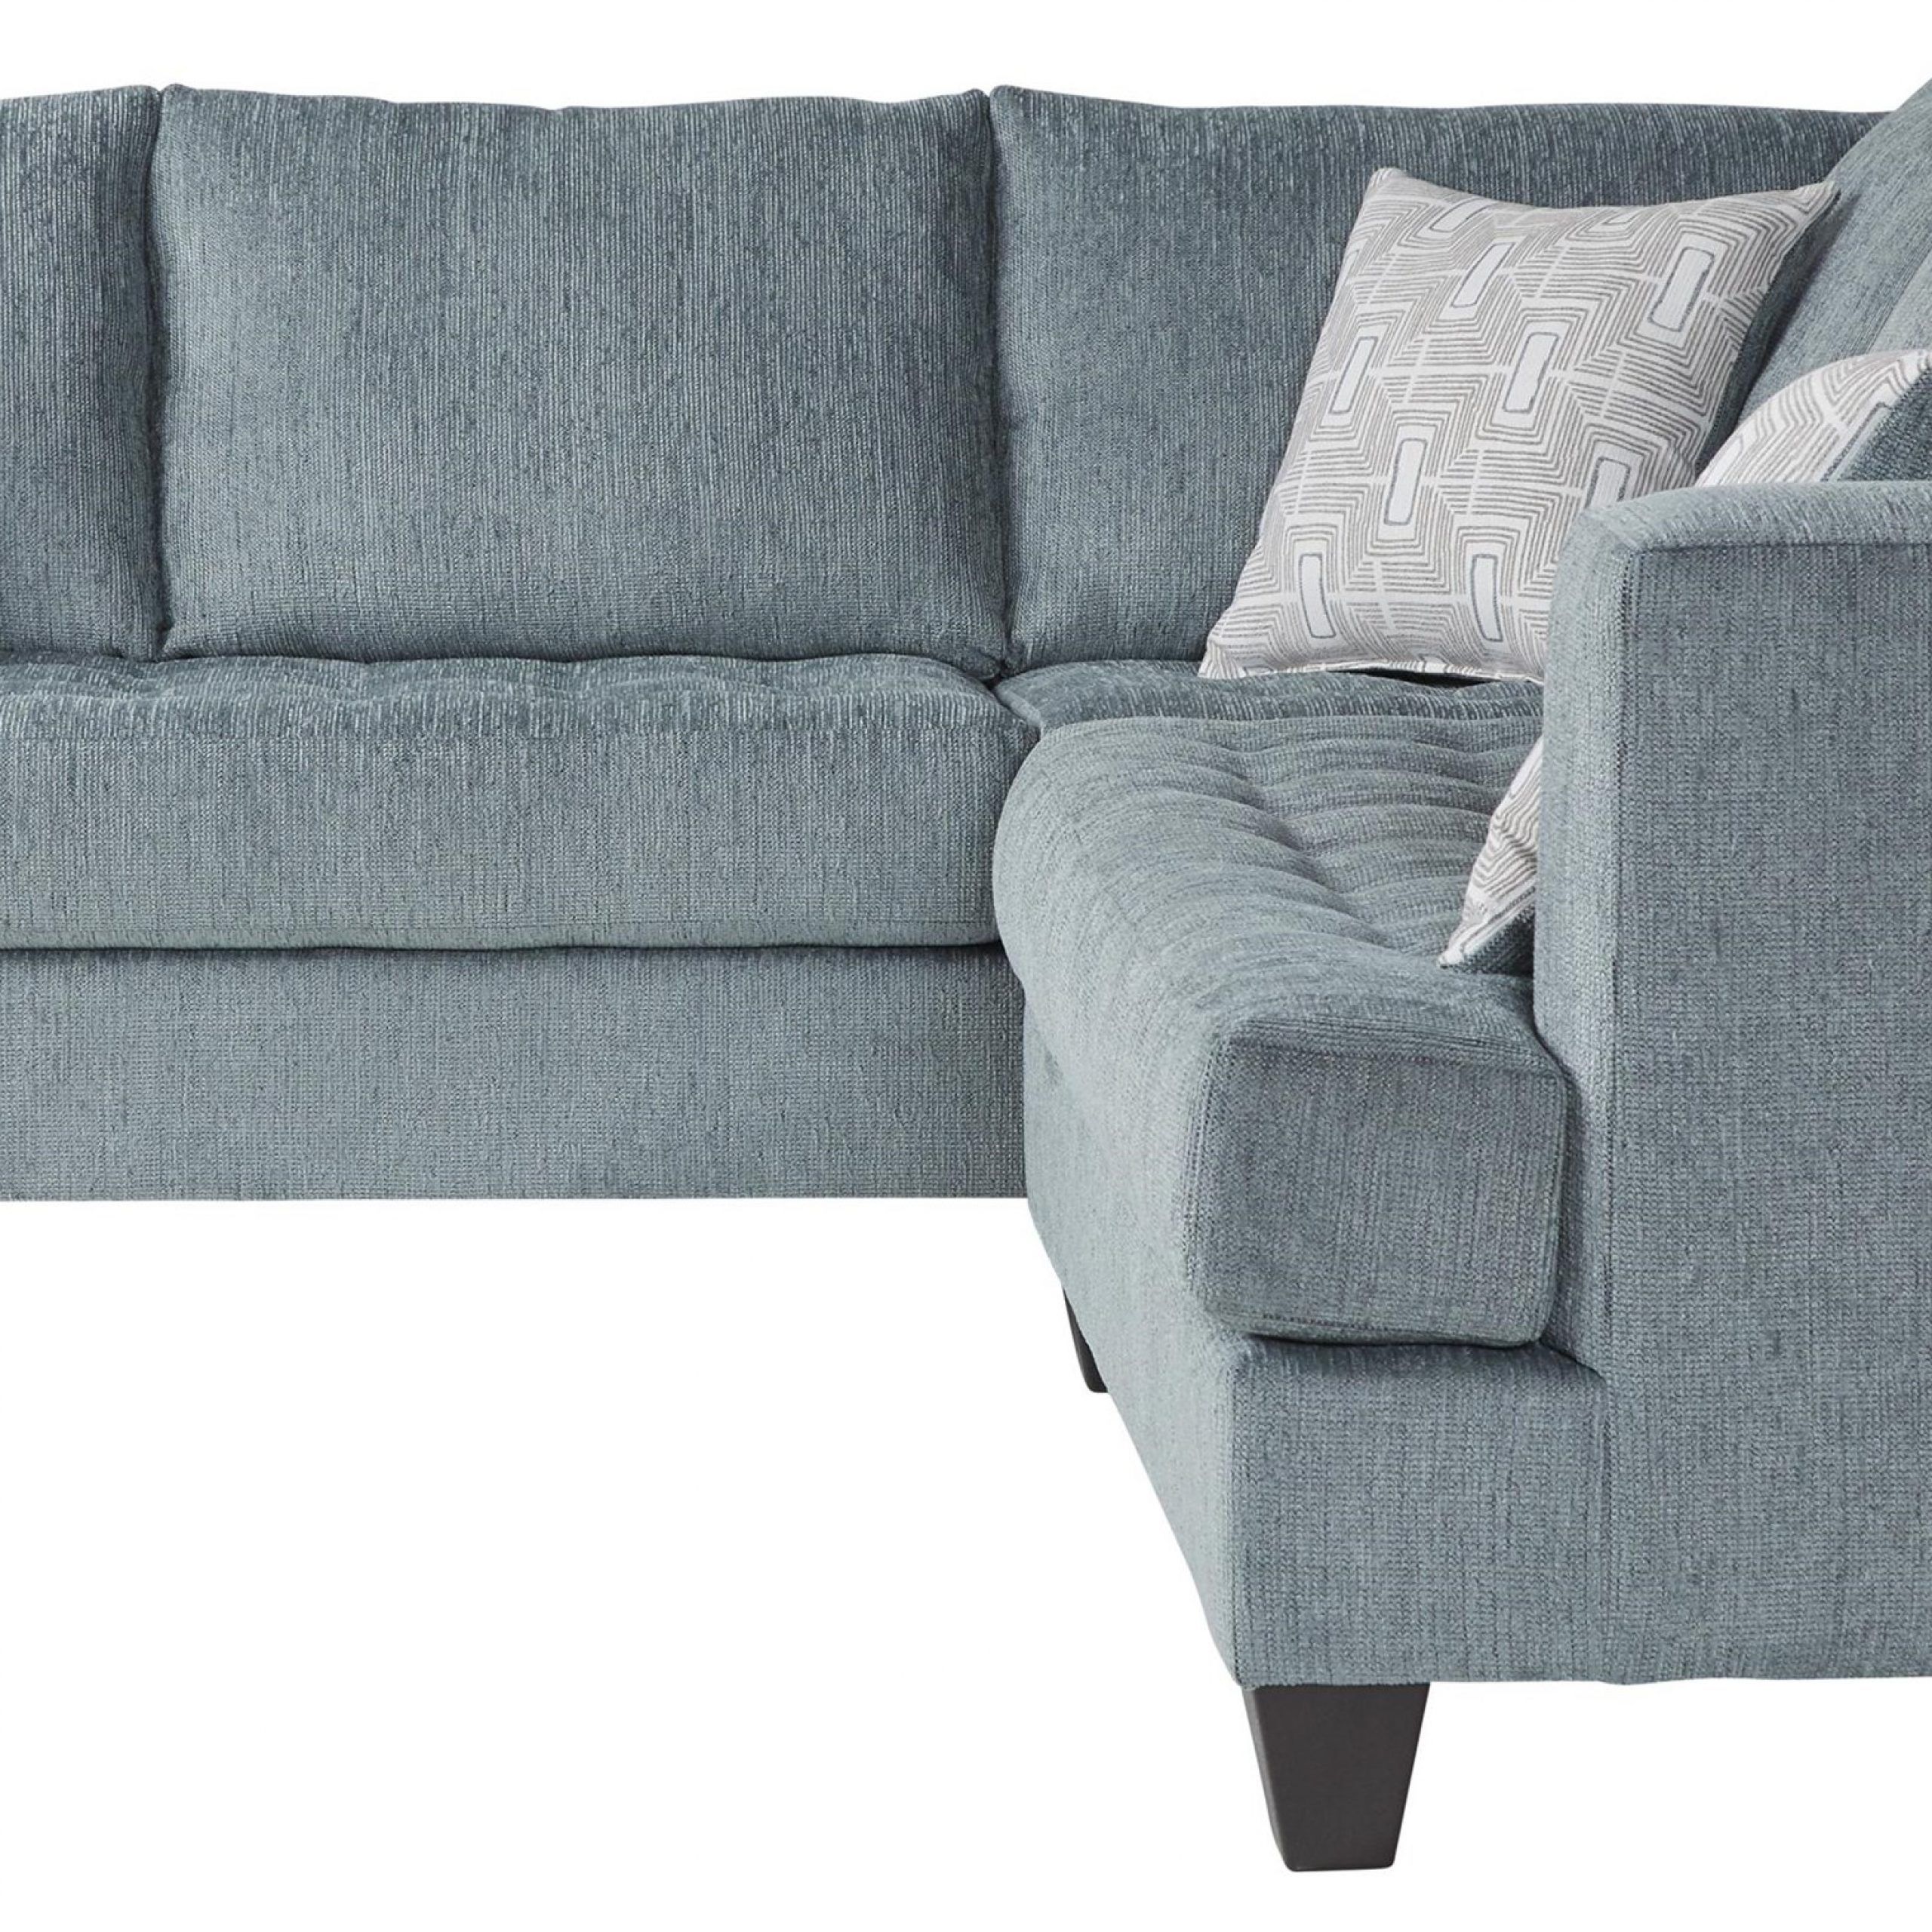 Serta Upholstery Sectionals: Ashas Spiritual Essence Intended For Harmon Roll Arm Sectional Sofas (View 6 of 15)